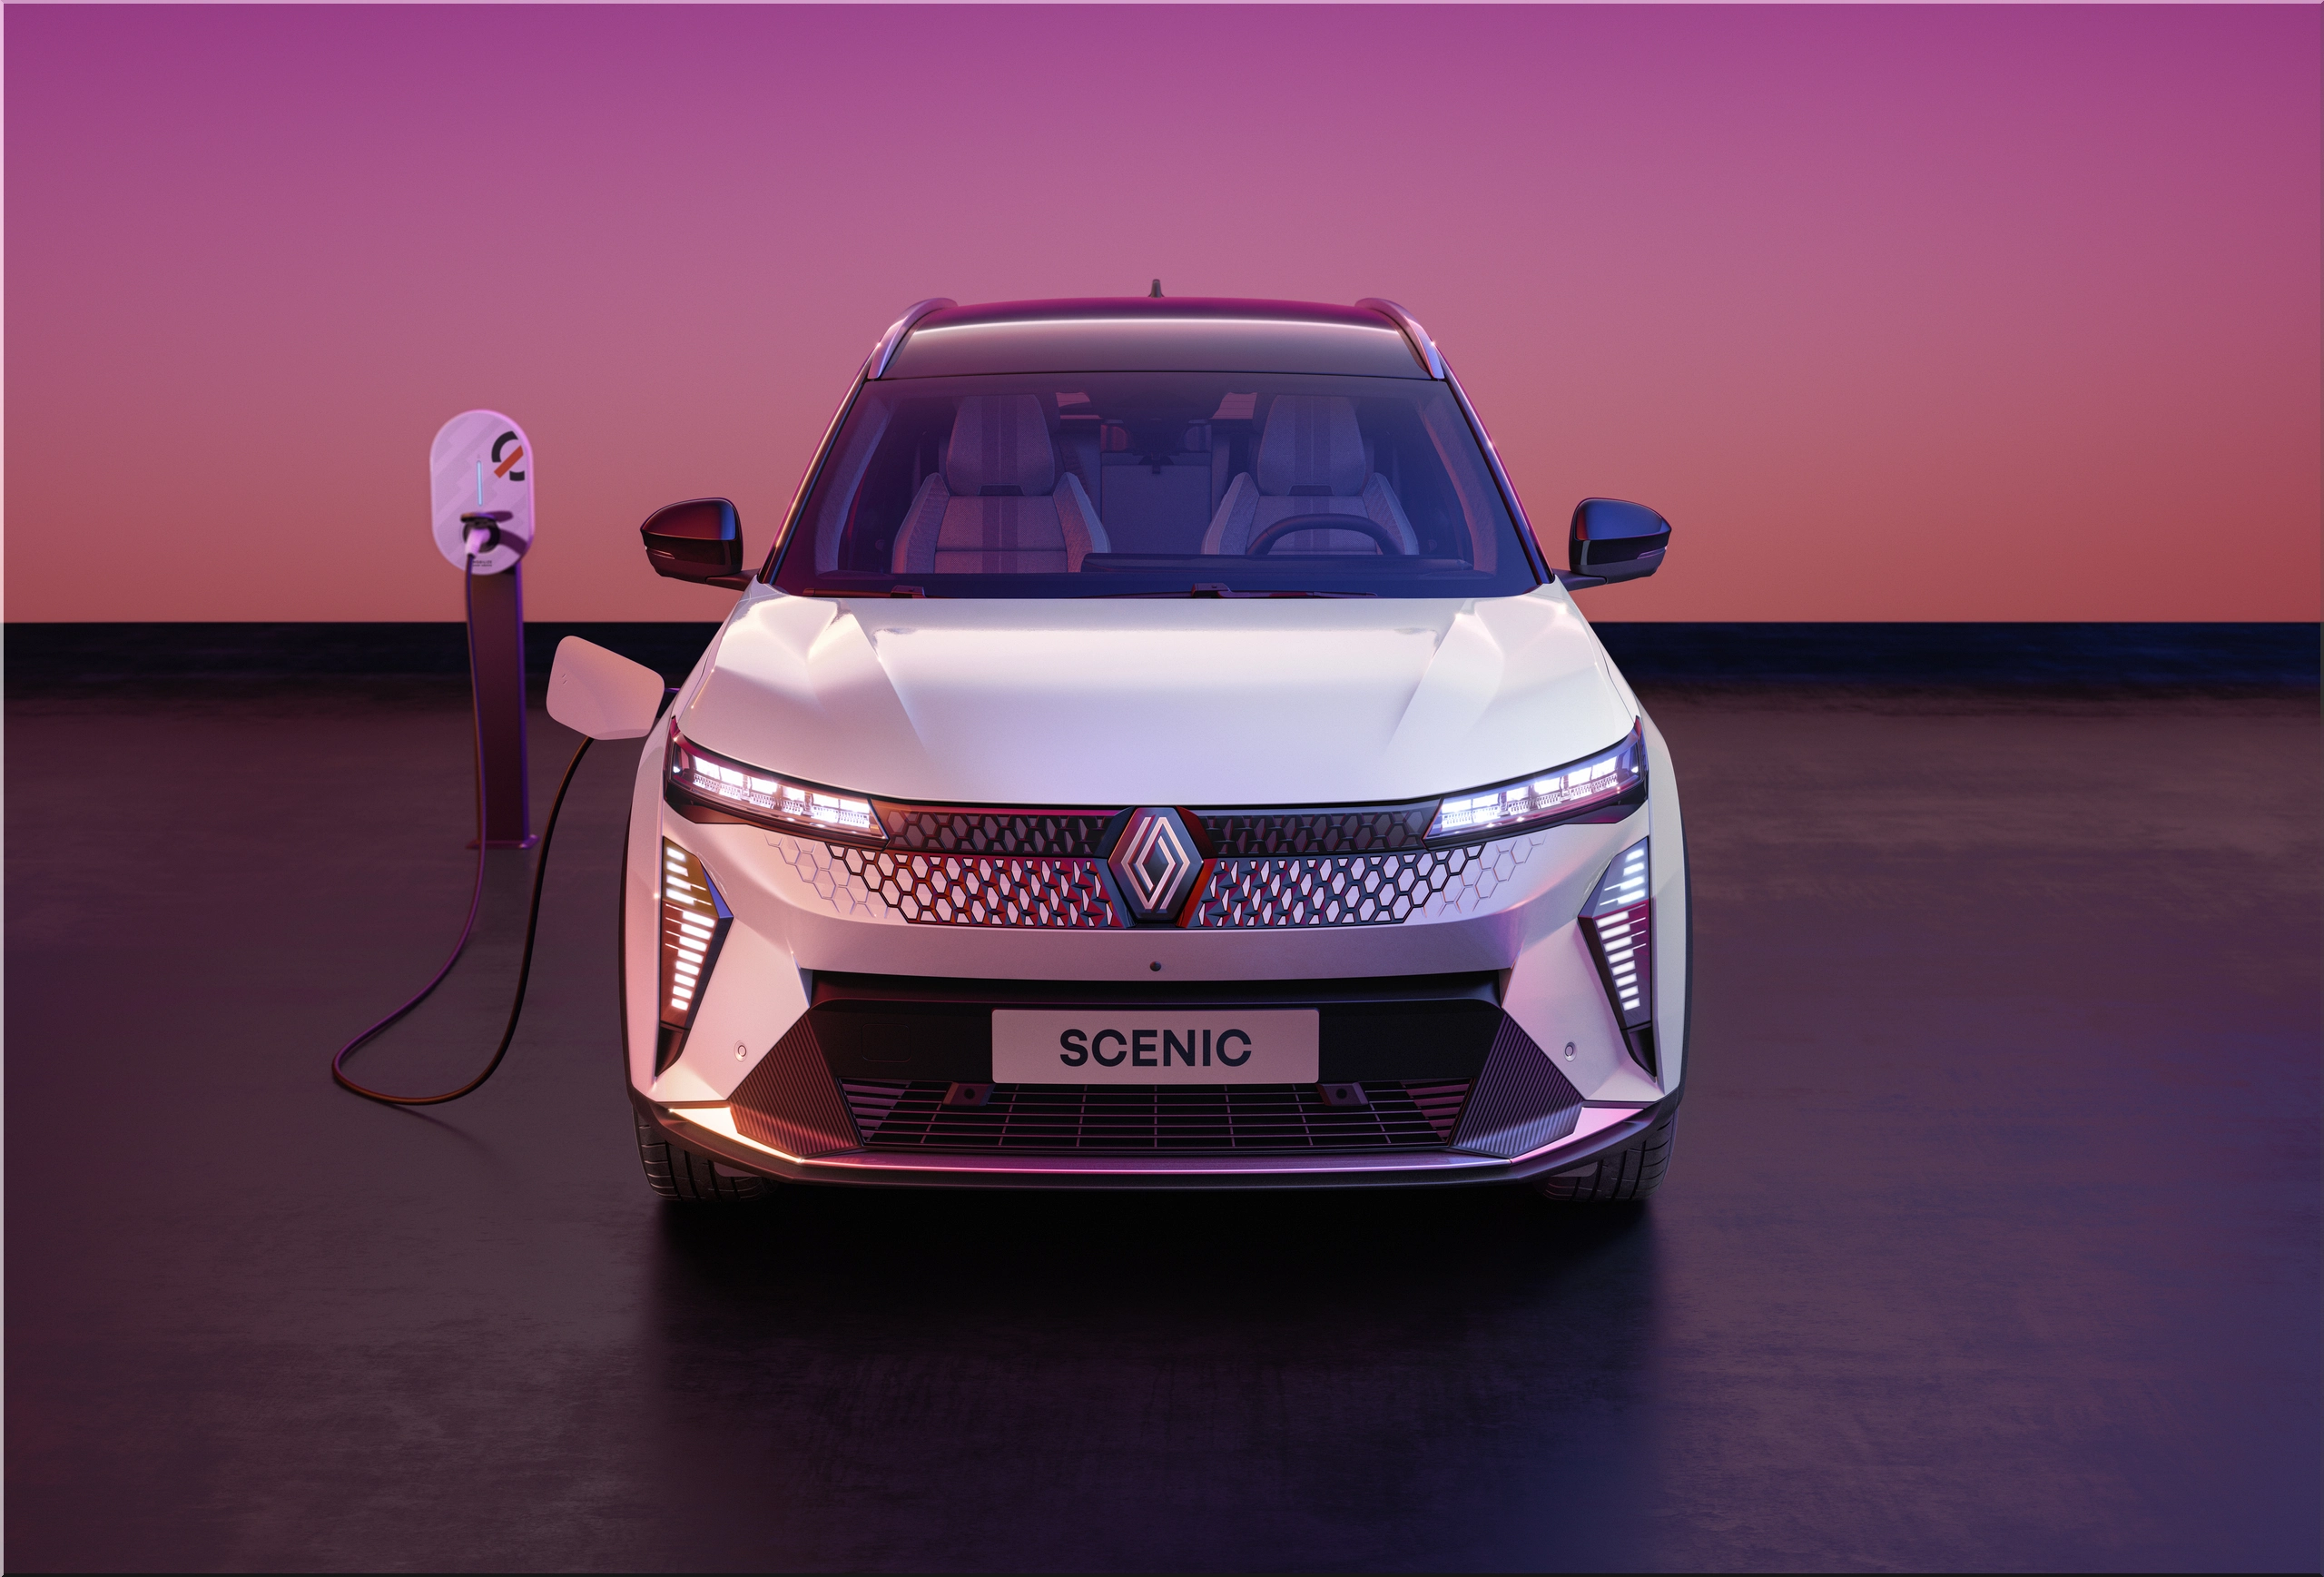 Renault Scenic is back — as an electric SUV